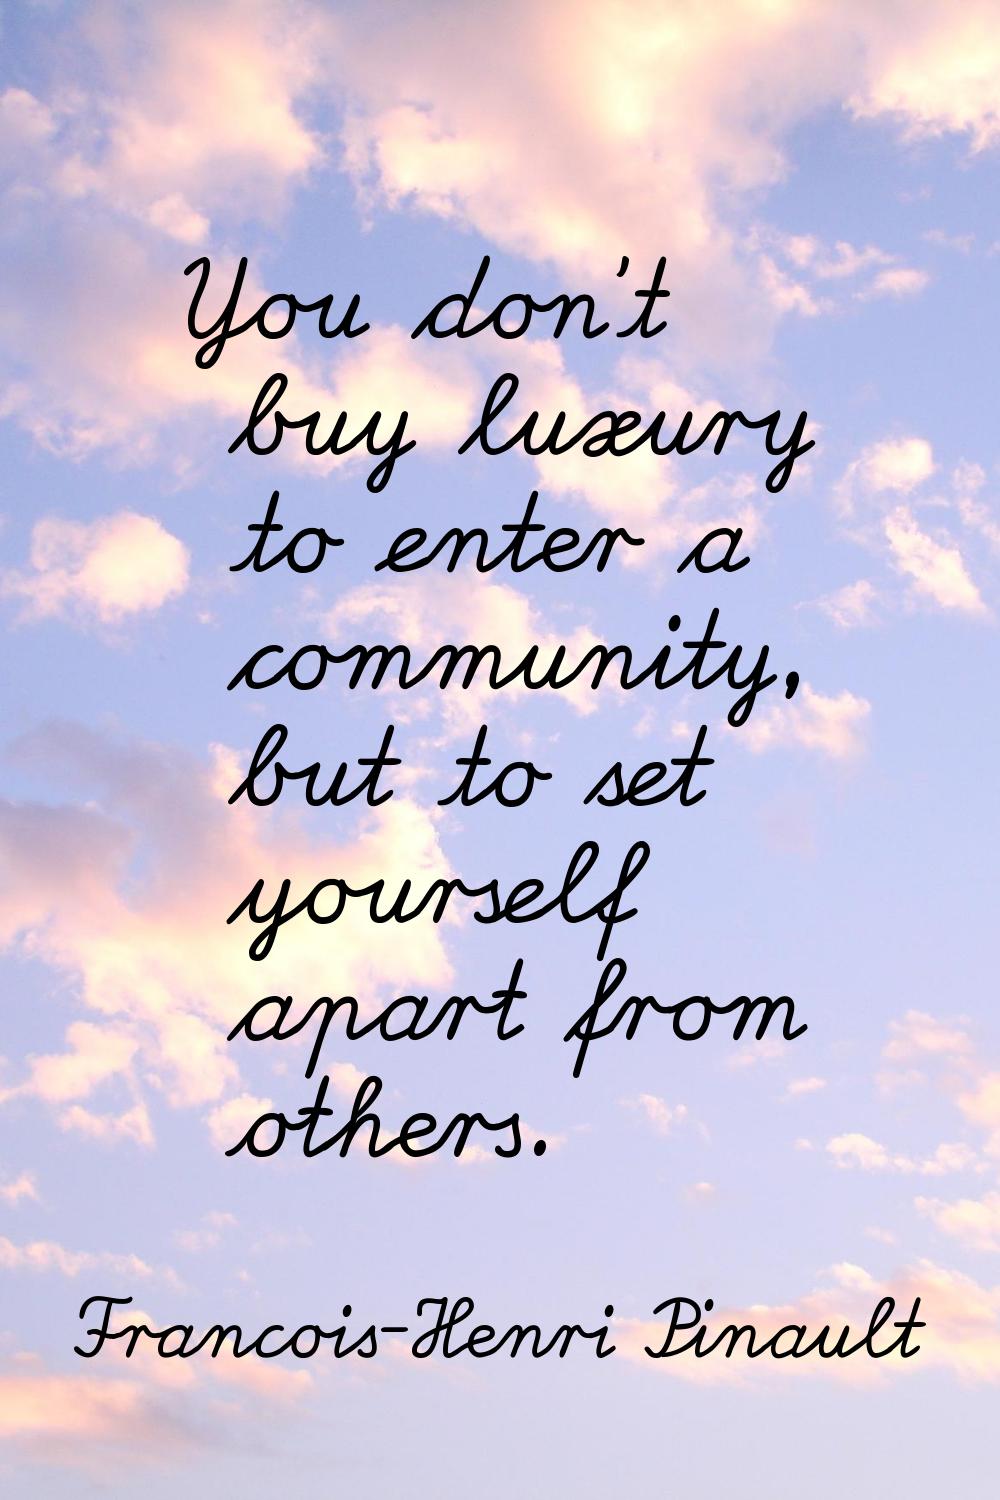 You don't buy luxury to enter a community, but to set yourself apart from others.